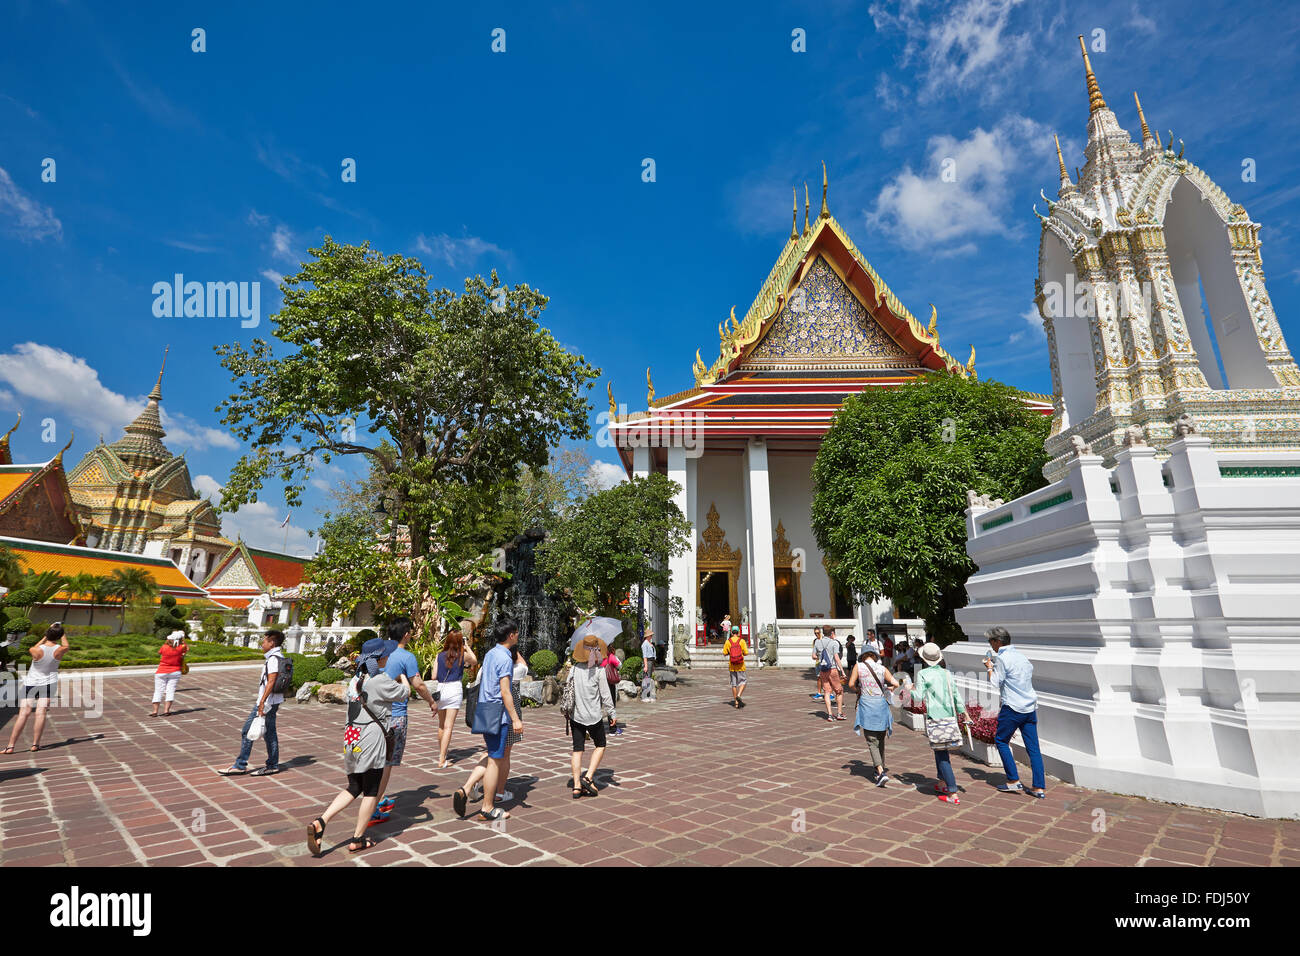 Tourists walking in the Wat Pho Temple. Bangkok, Thailand. Stock Photo